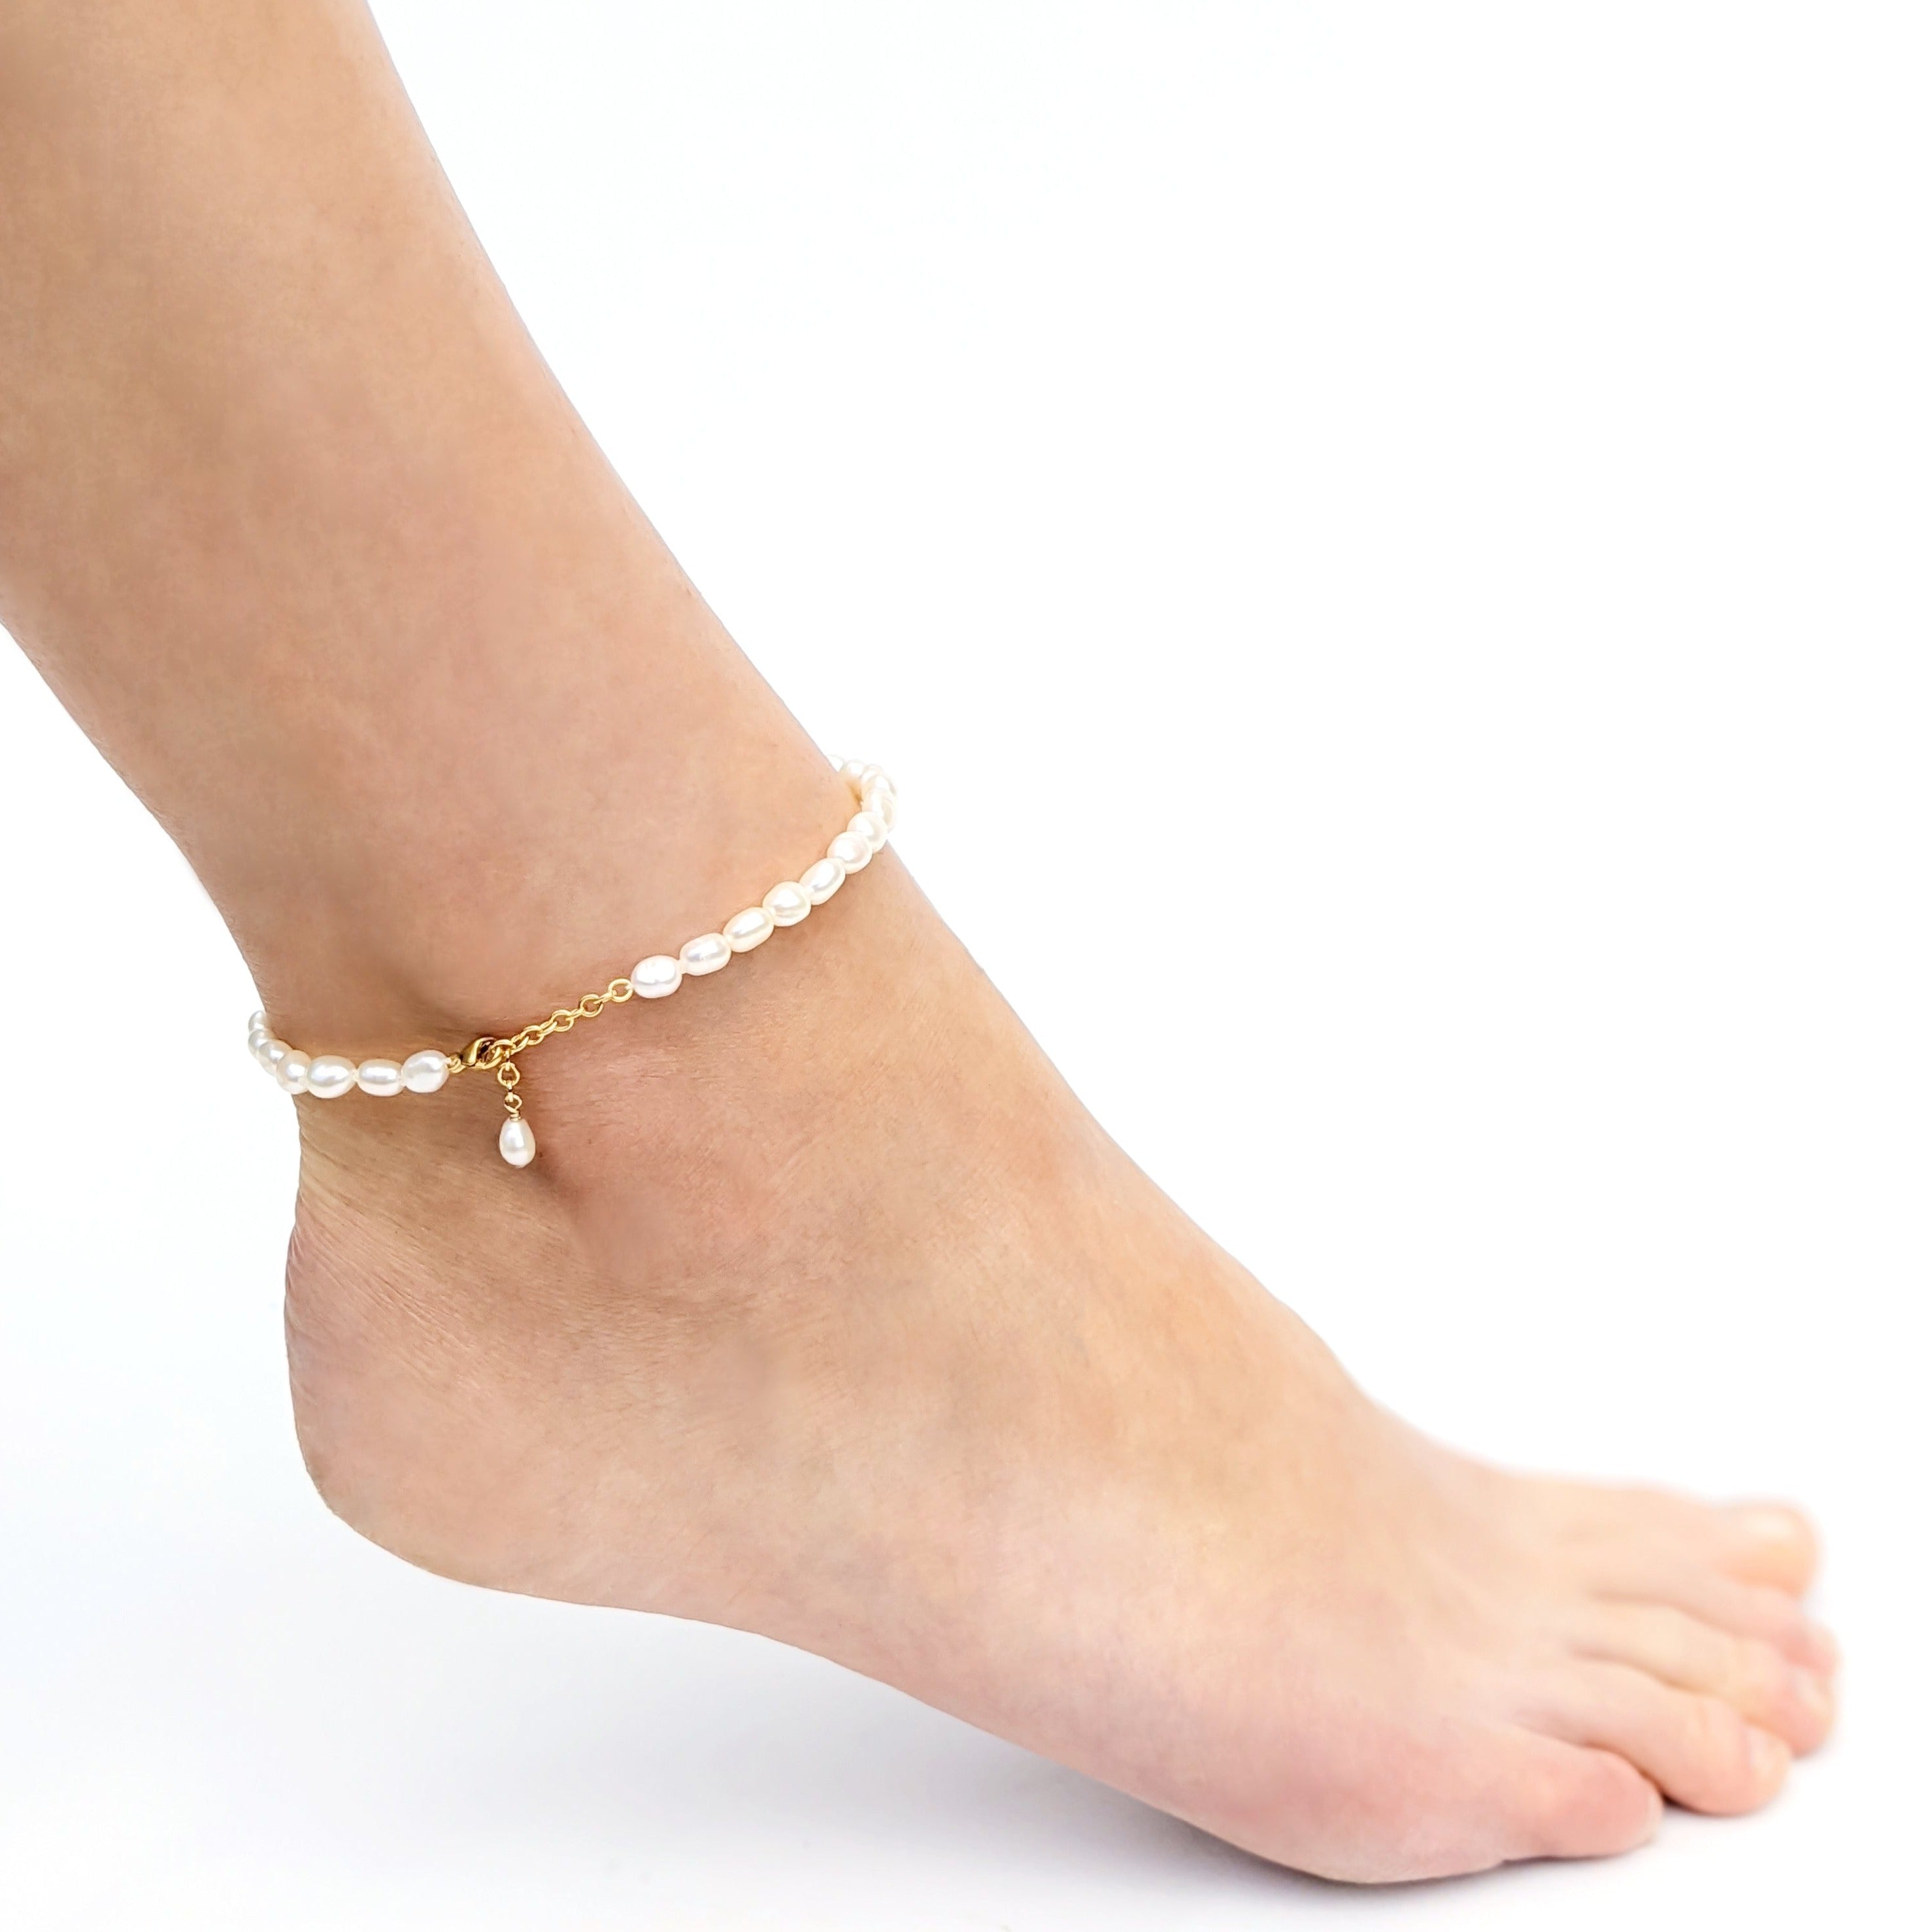 Baroque pearl ankle bracelet with gold clasp